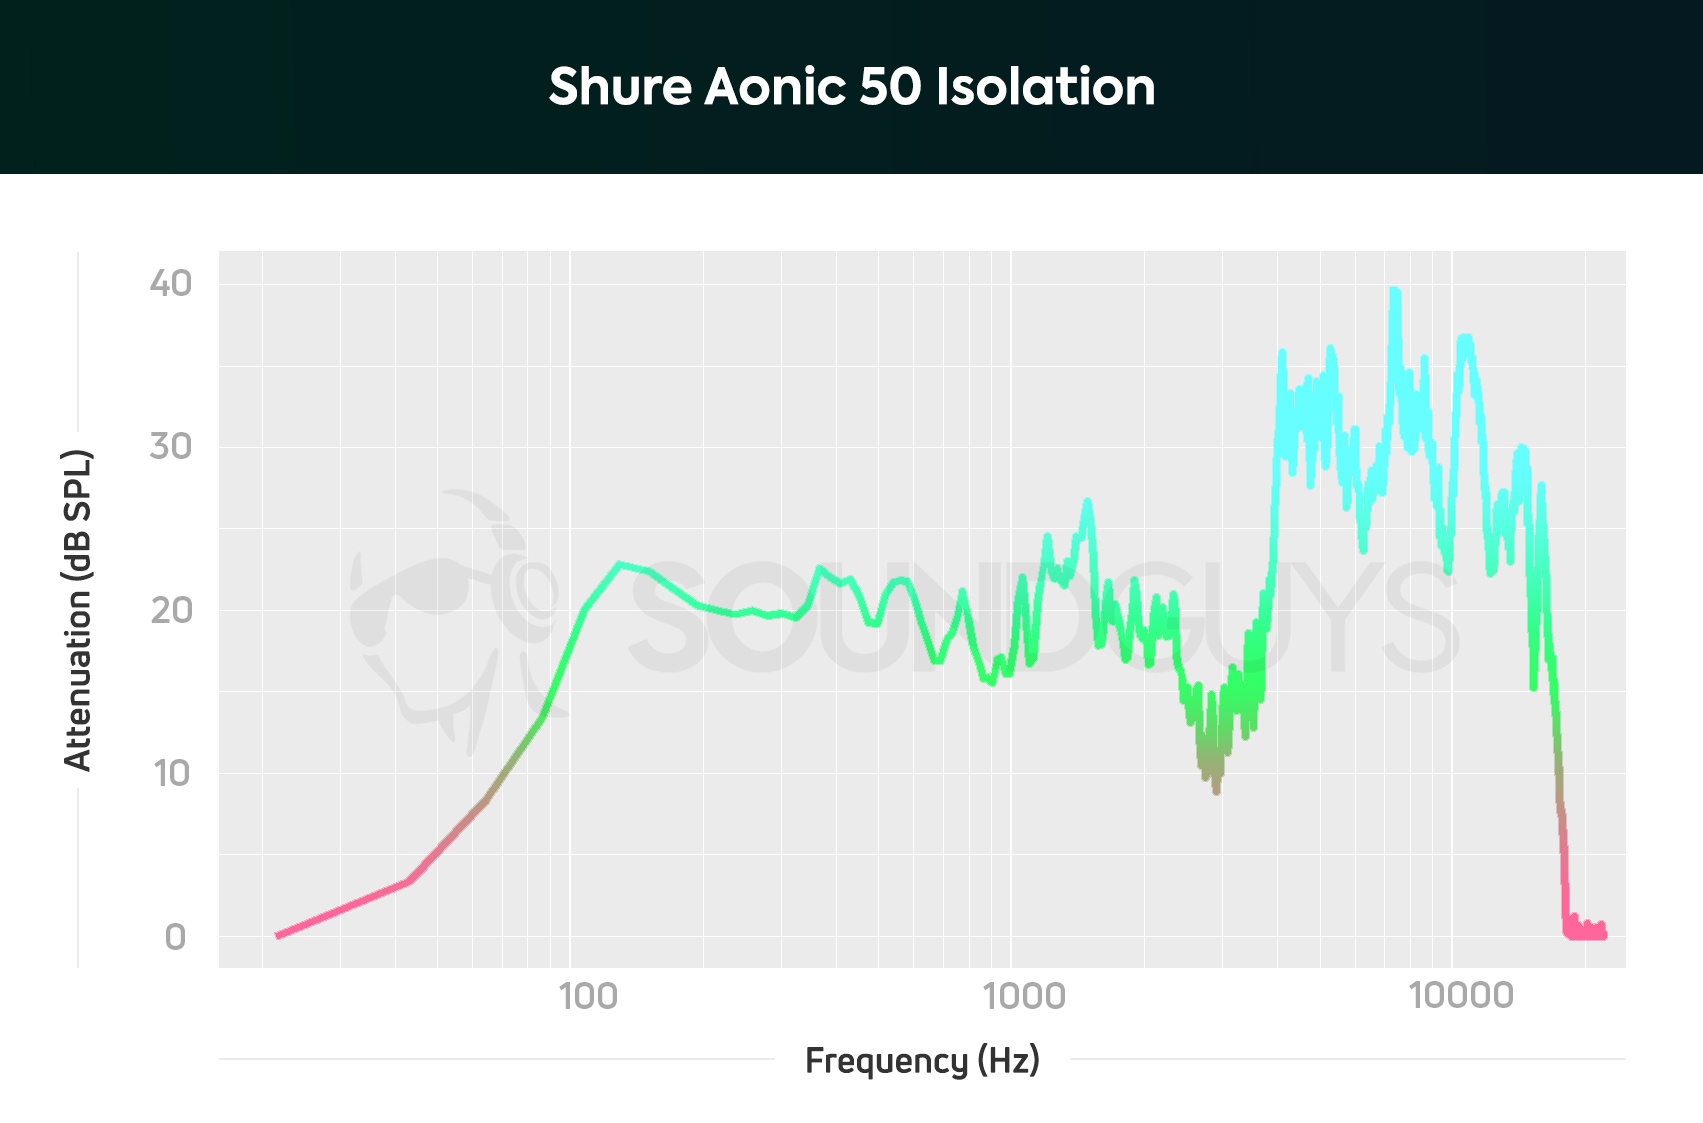 A chart depicting the Shure Aonic 50 noise canceling performance and attenuation.